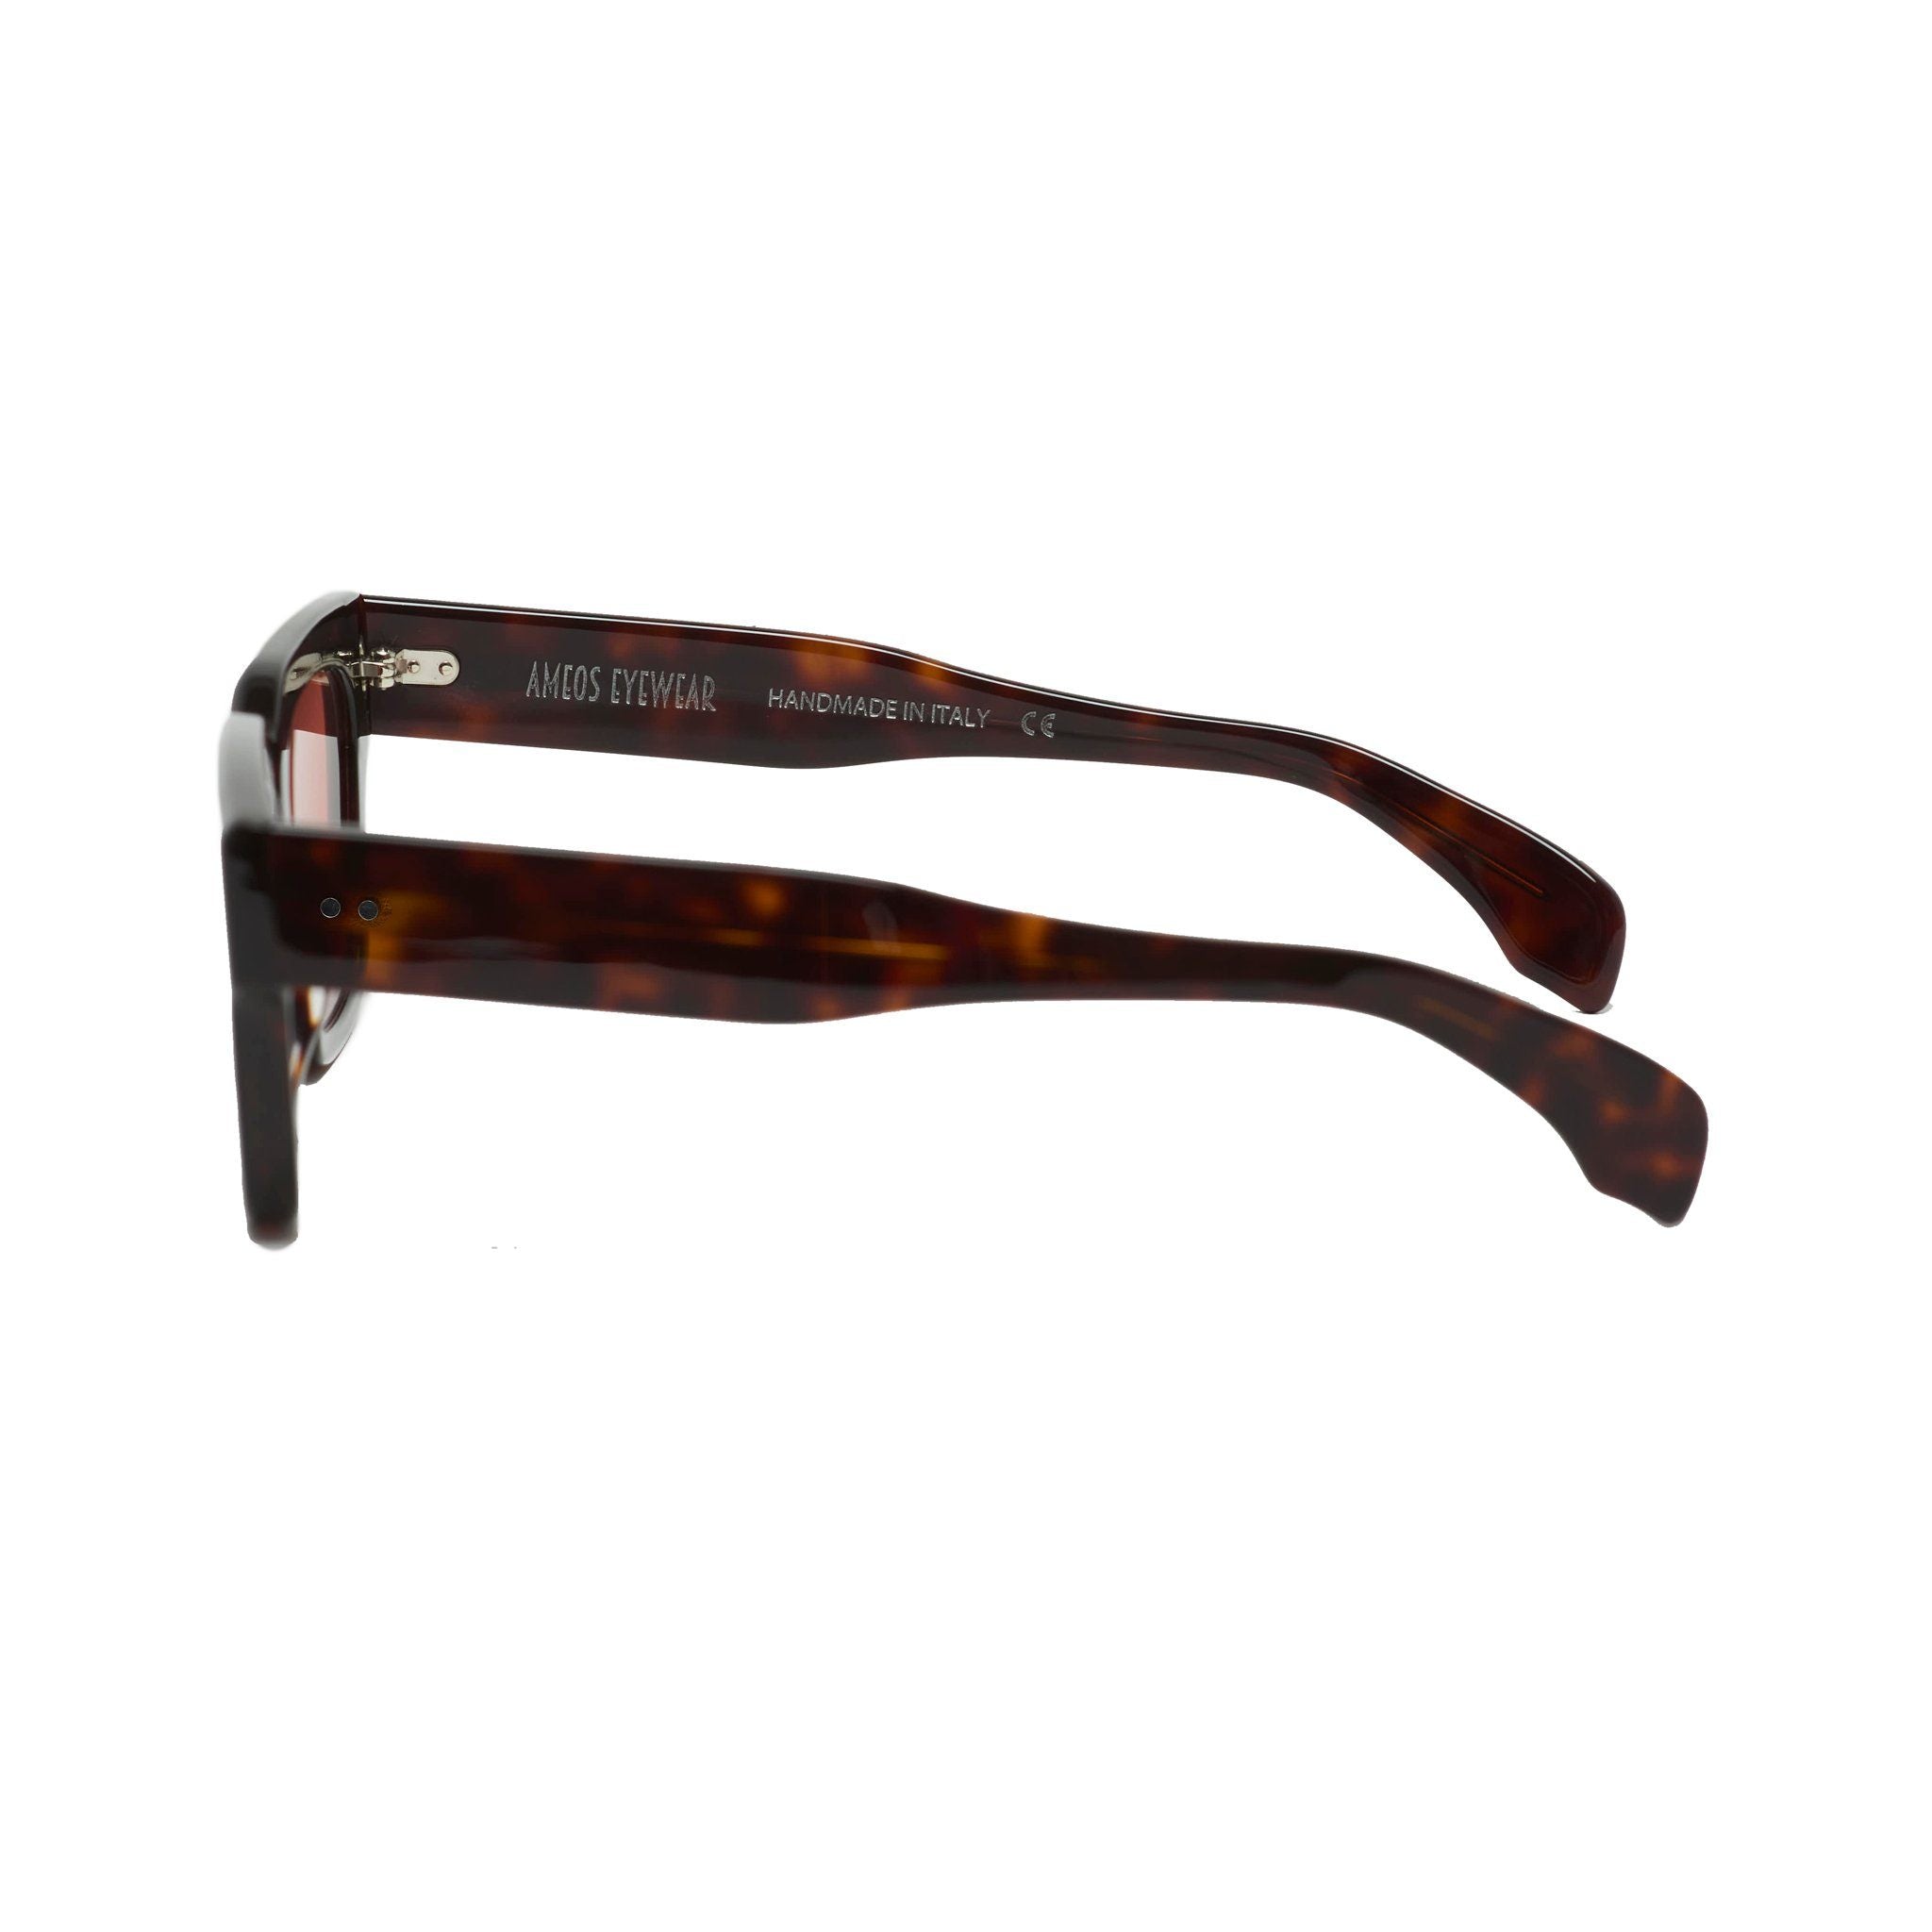 Tortoise frames sunglasses with red lenses. Sideview